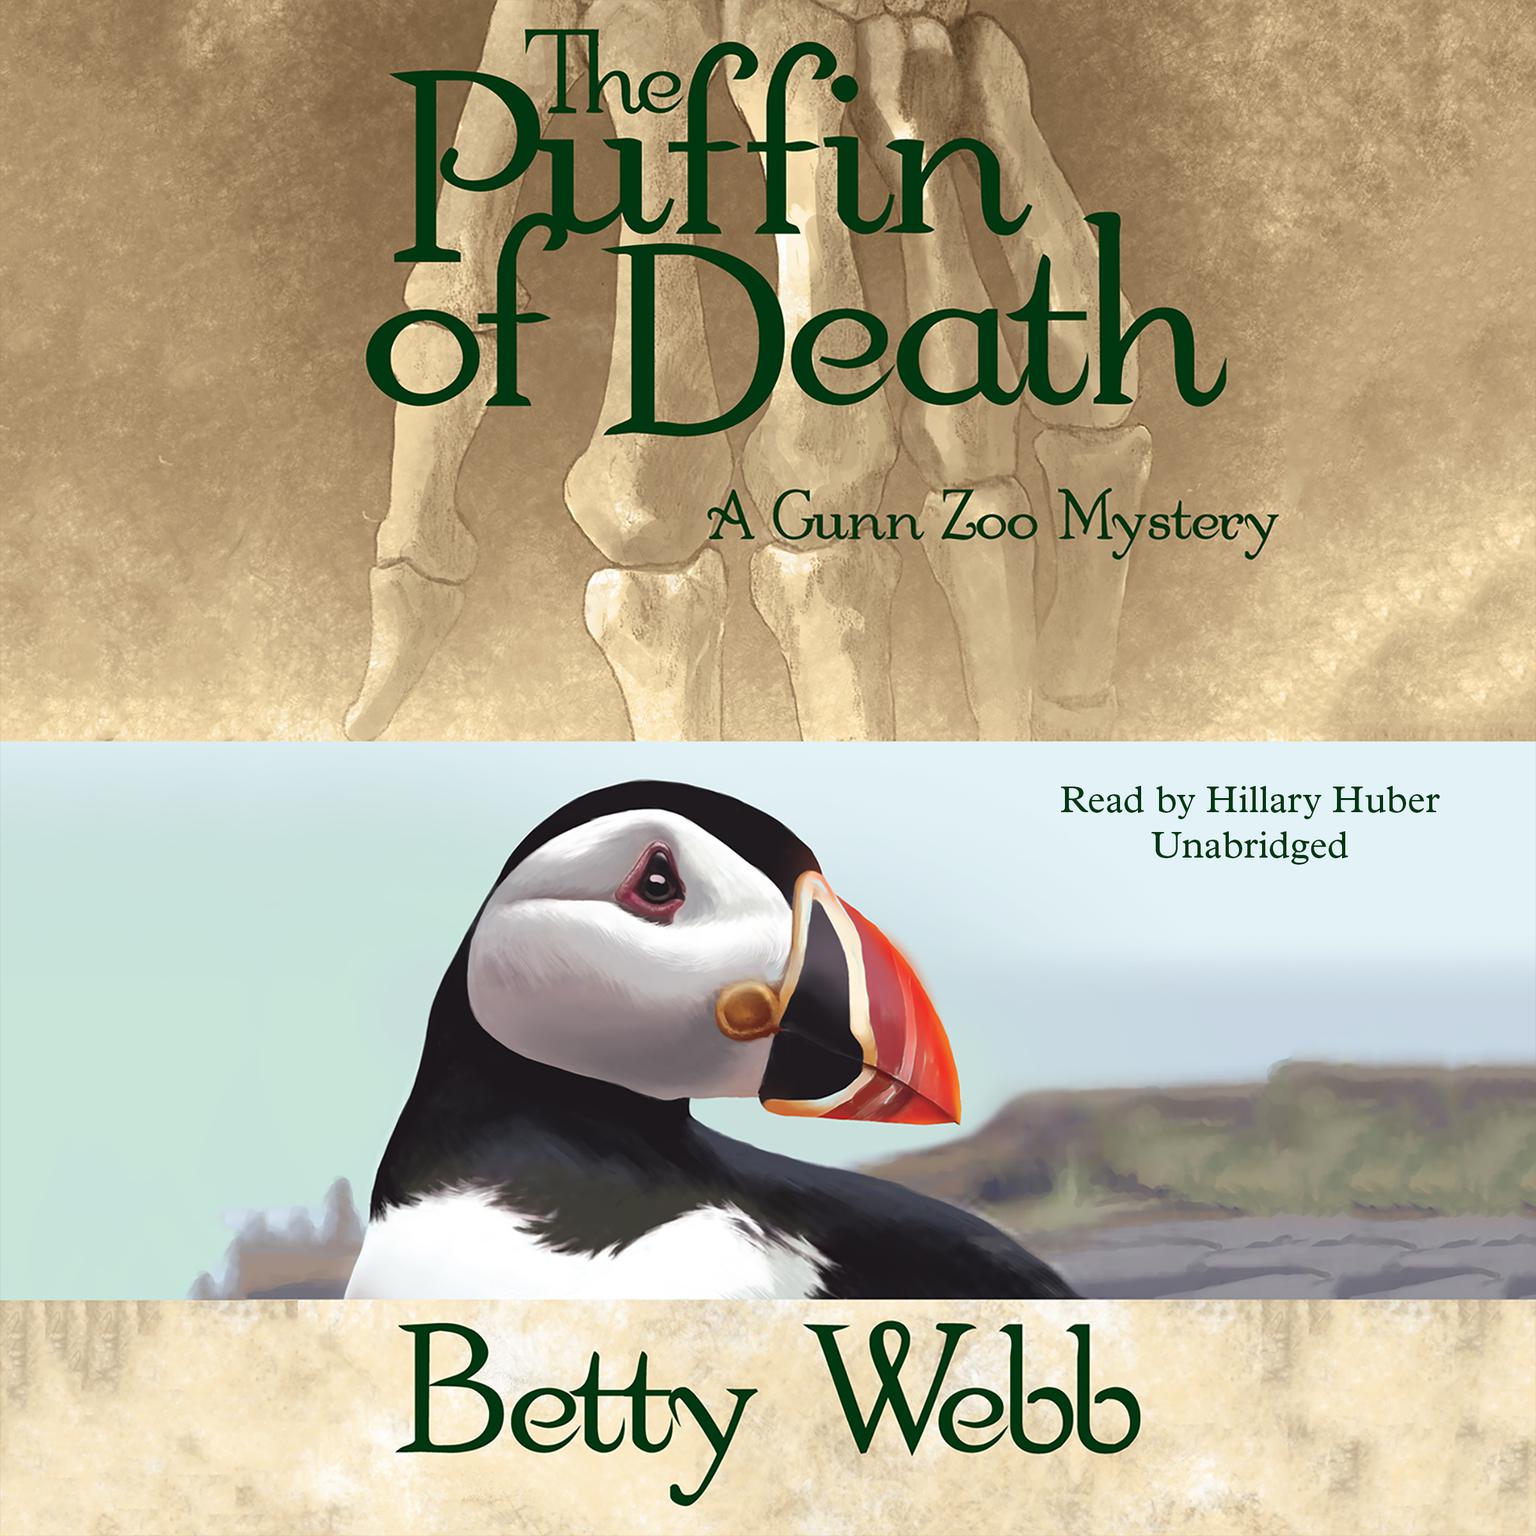 The Puffin of Death: A Gunn Zoo Mystery Audiobook, by Betty Webb